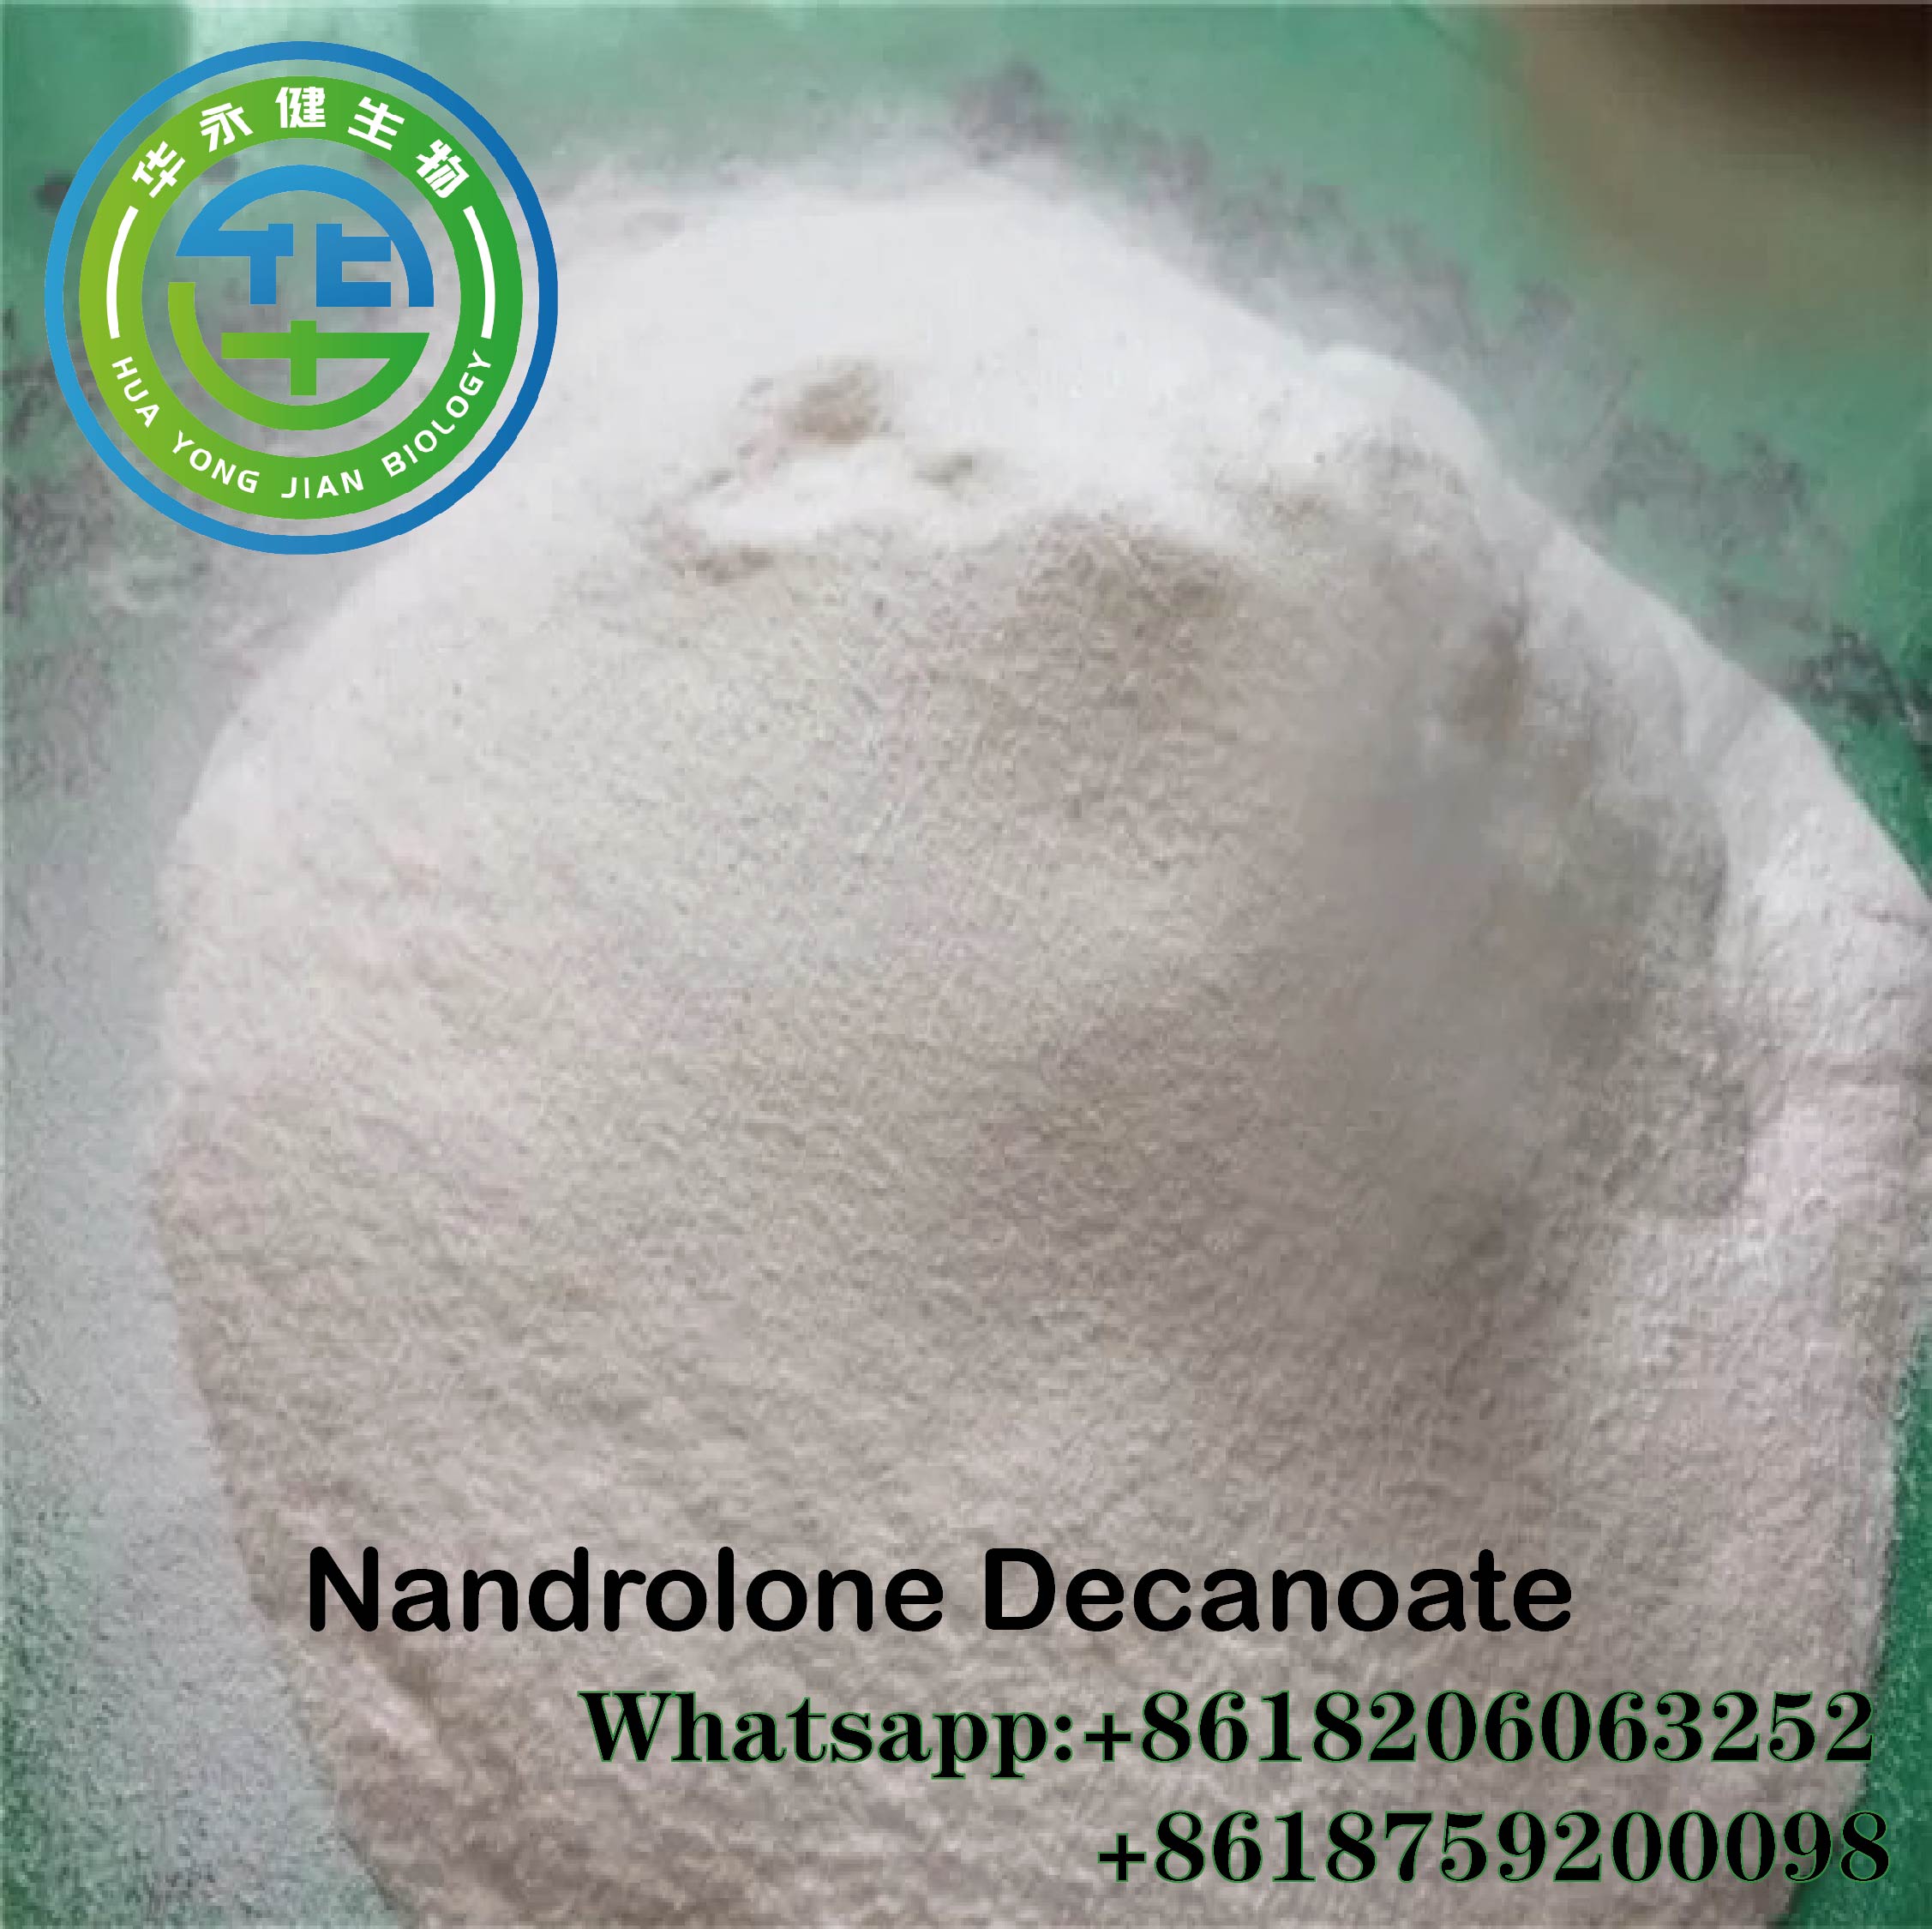  Nandrolone Decanoate White Raw  Powder Deca300 Anabolic Mestanolone For Muscle Building CasNO.360-70-3/DECA	